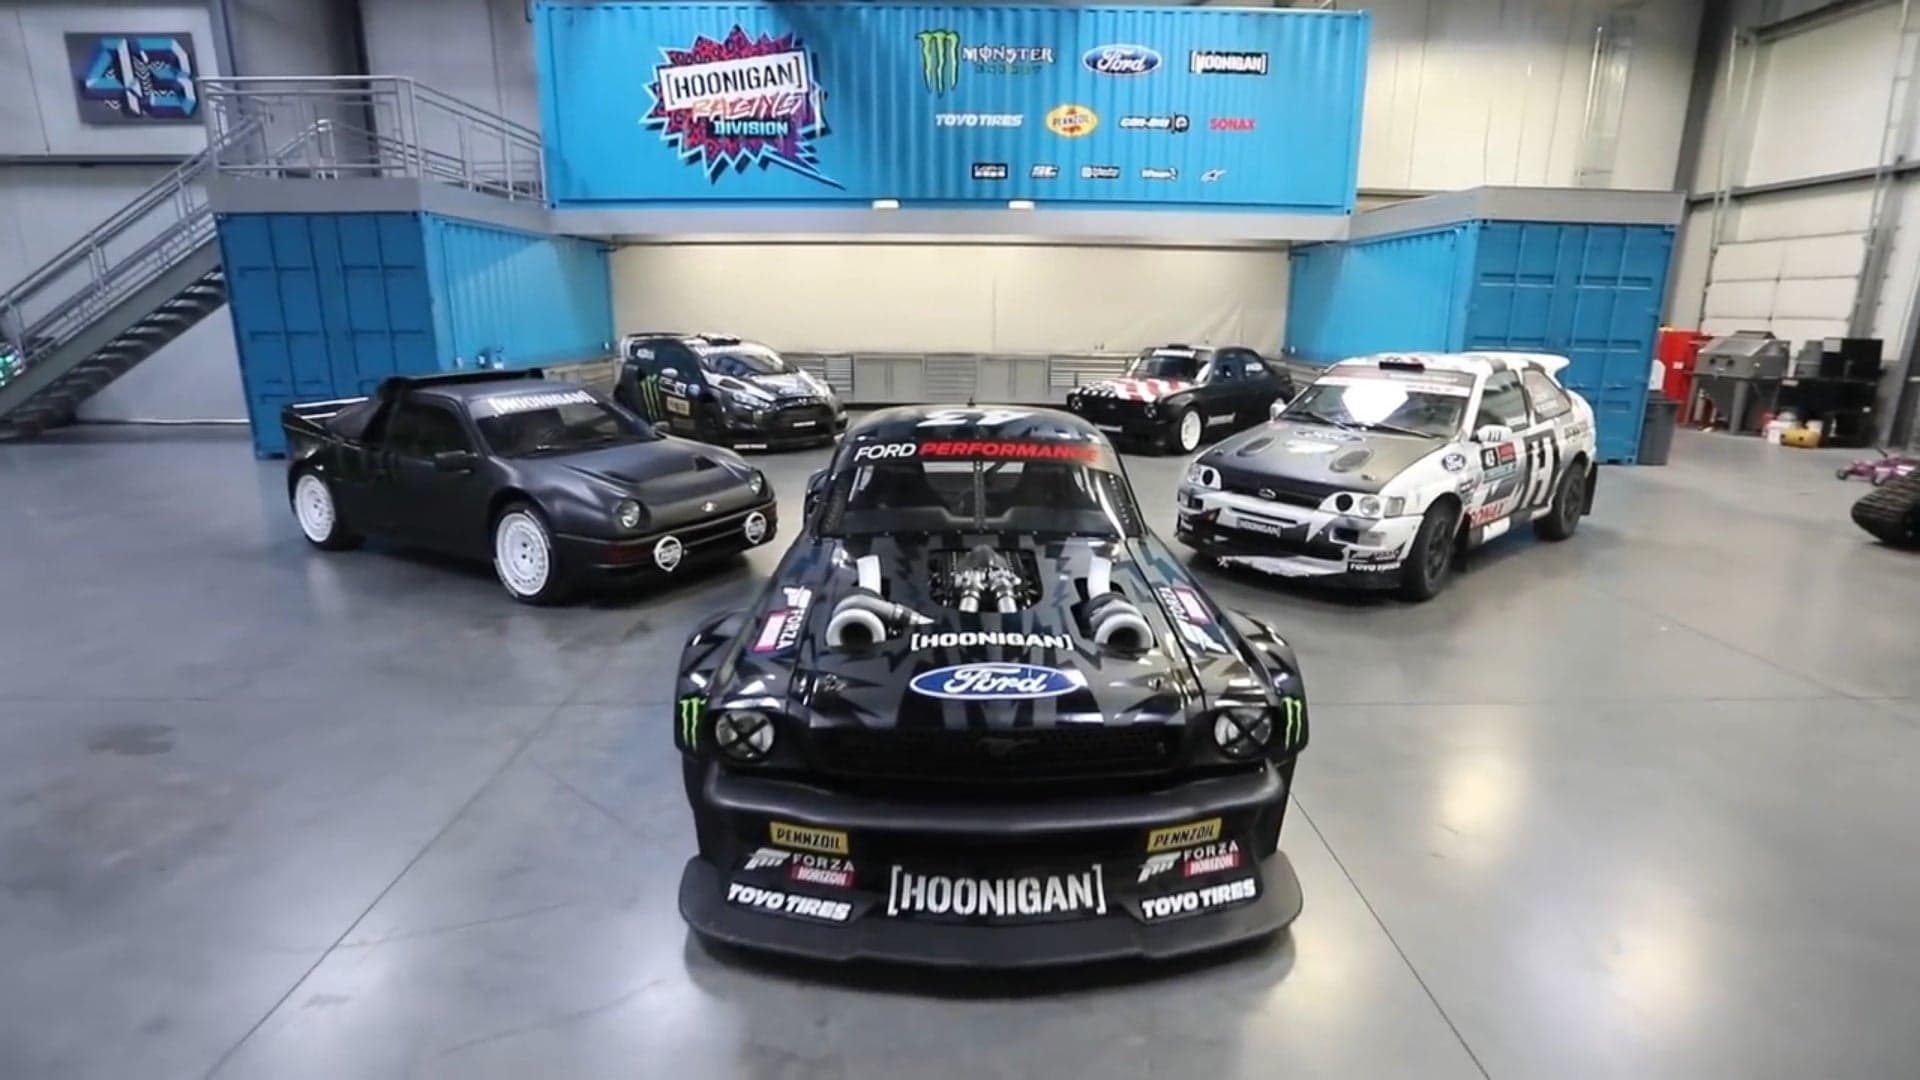 Ken Block Gives a Tour of Hoonigan Racing Division HQ to Show His ‘Carcaine’ Addiction